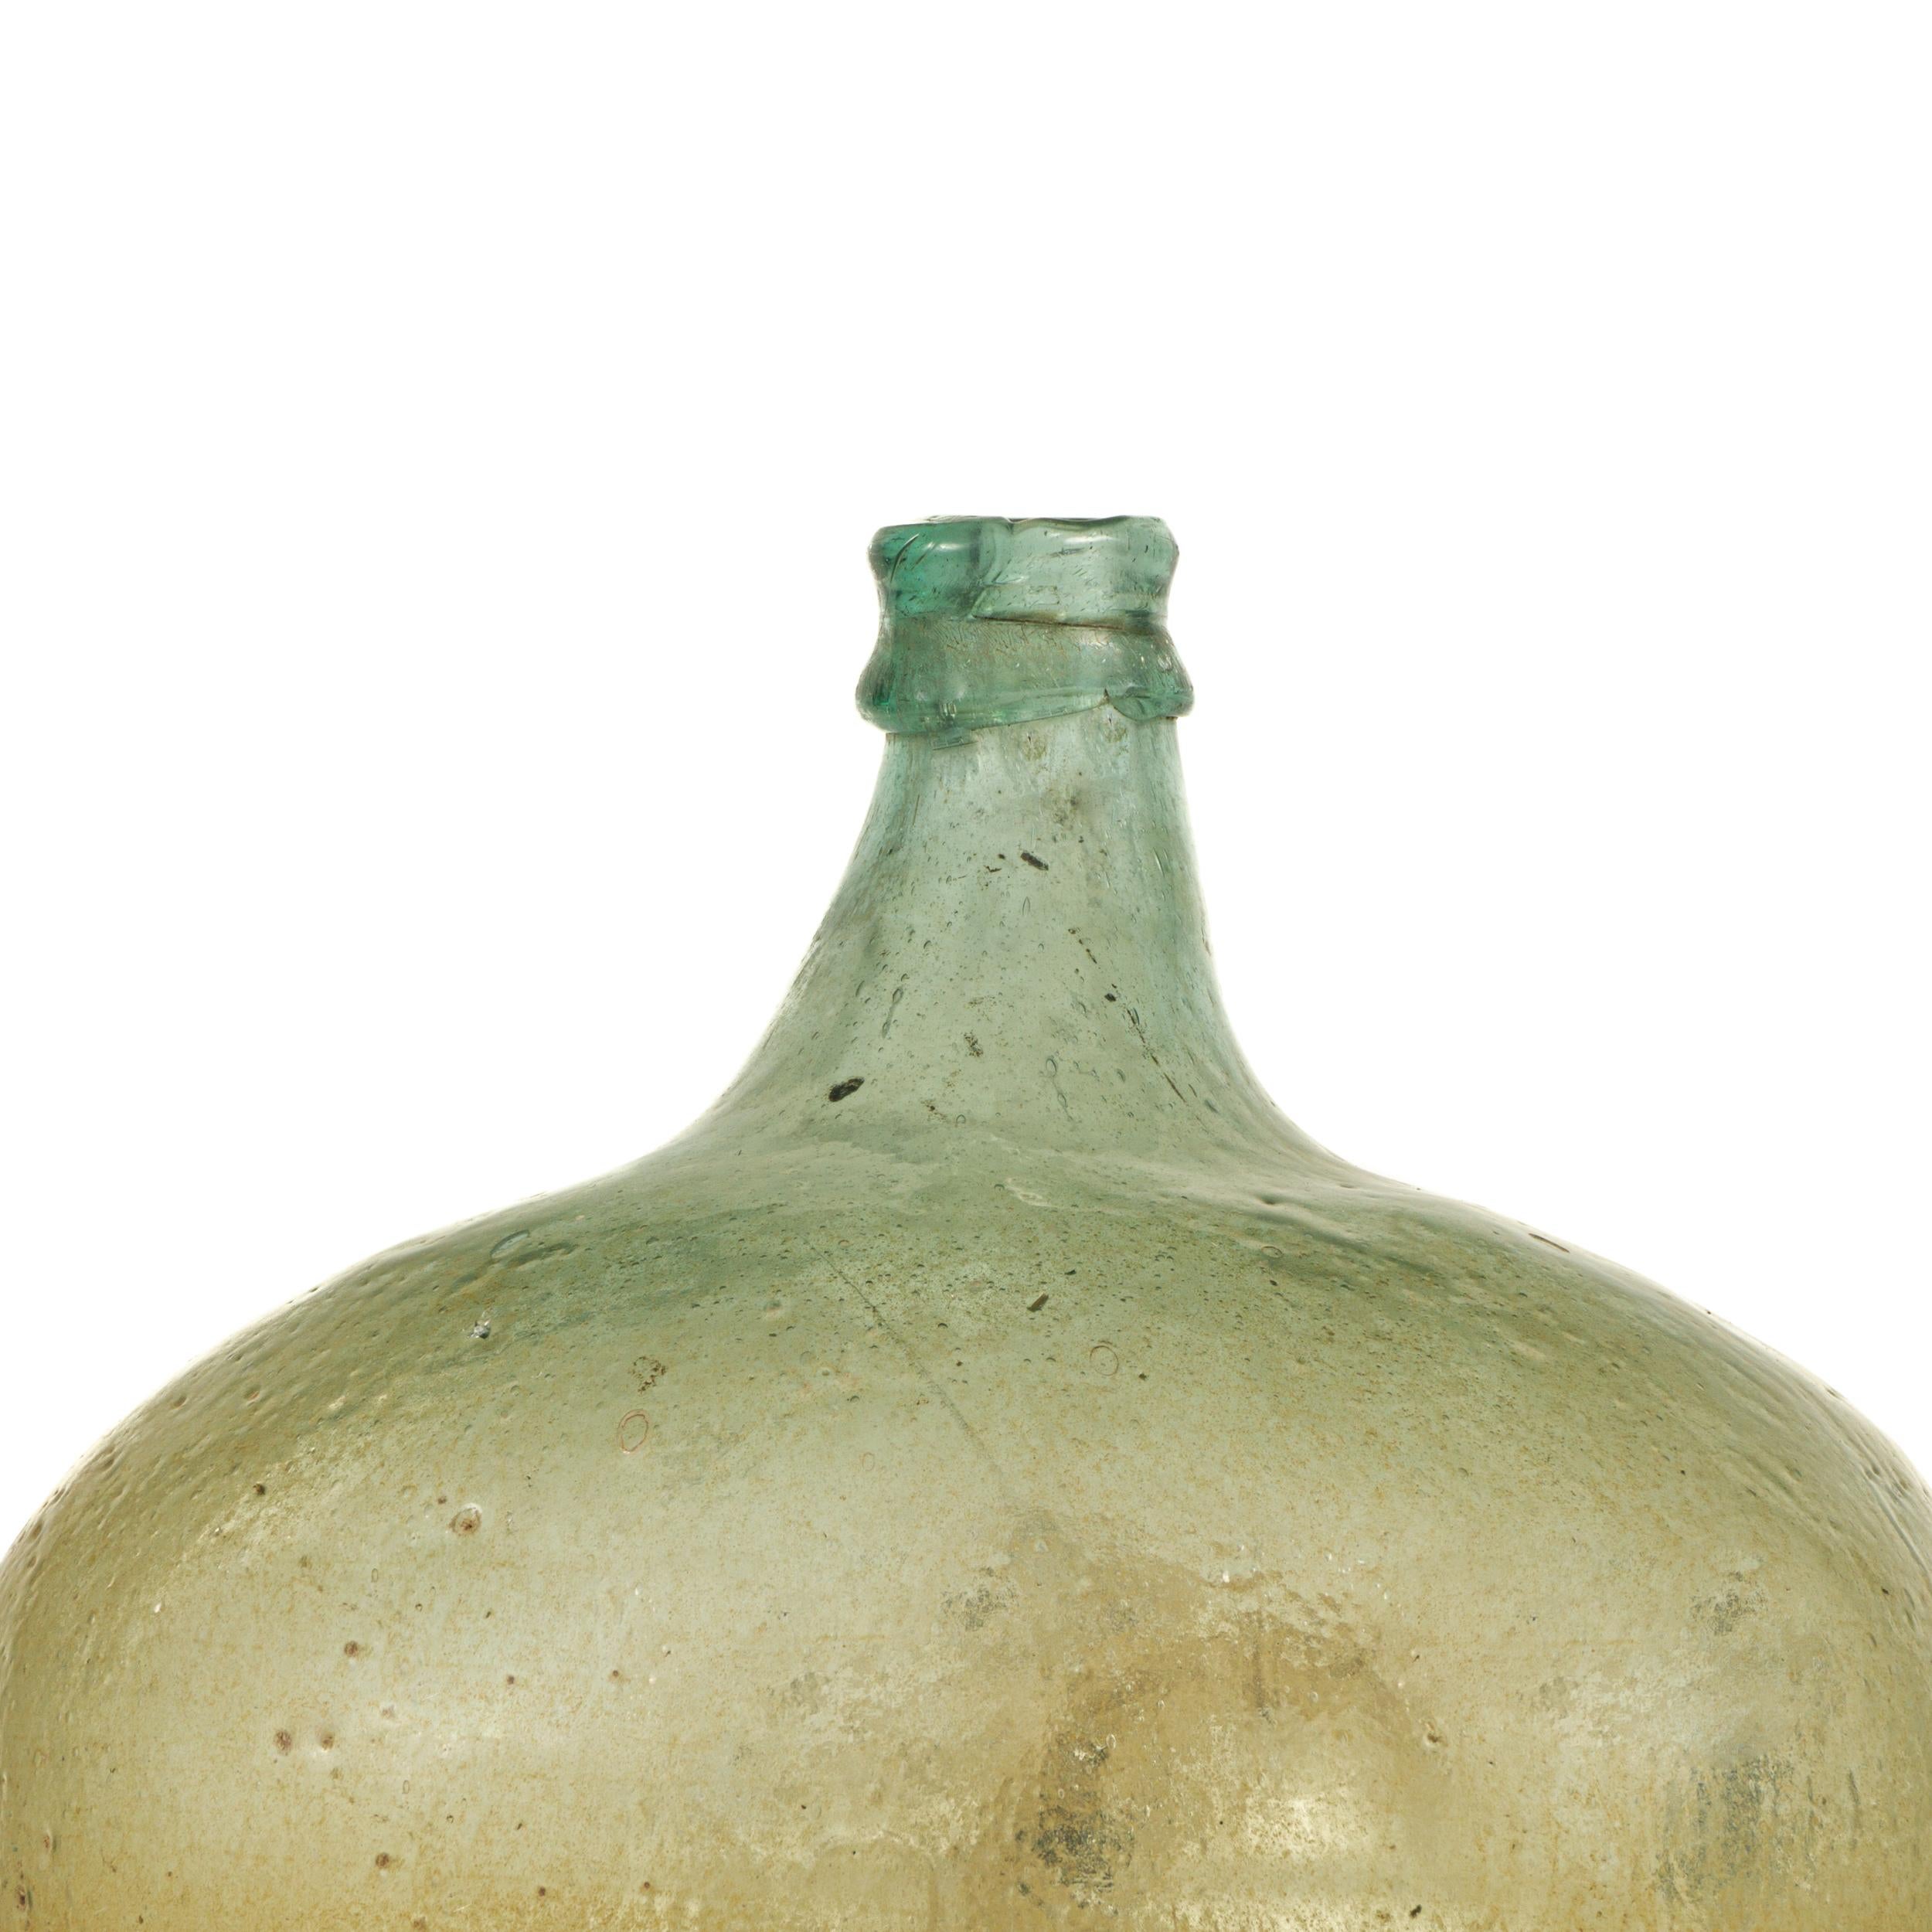 Late 19th century Green mouth blown glass Demijohn from Southern Mexico.
Originally used as a traditional containers mainly for wine storage and transport.
Today, they can be used as decorative accessories anywhere in the home, mainly because of